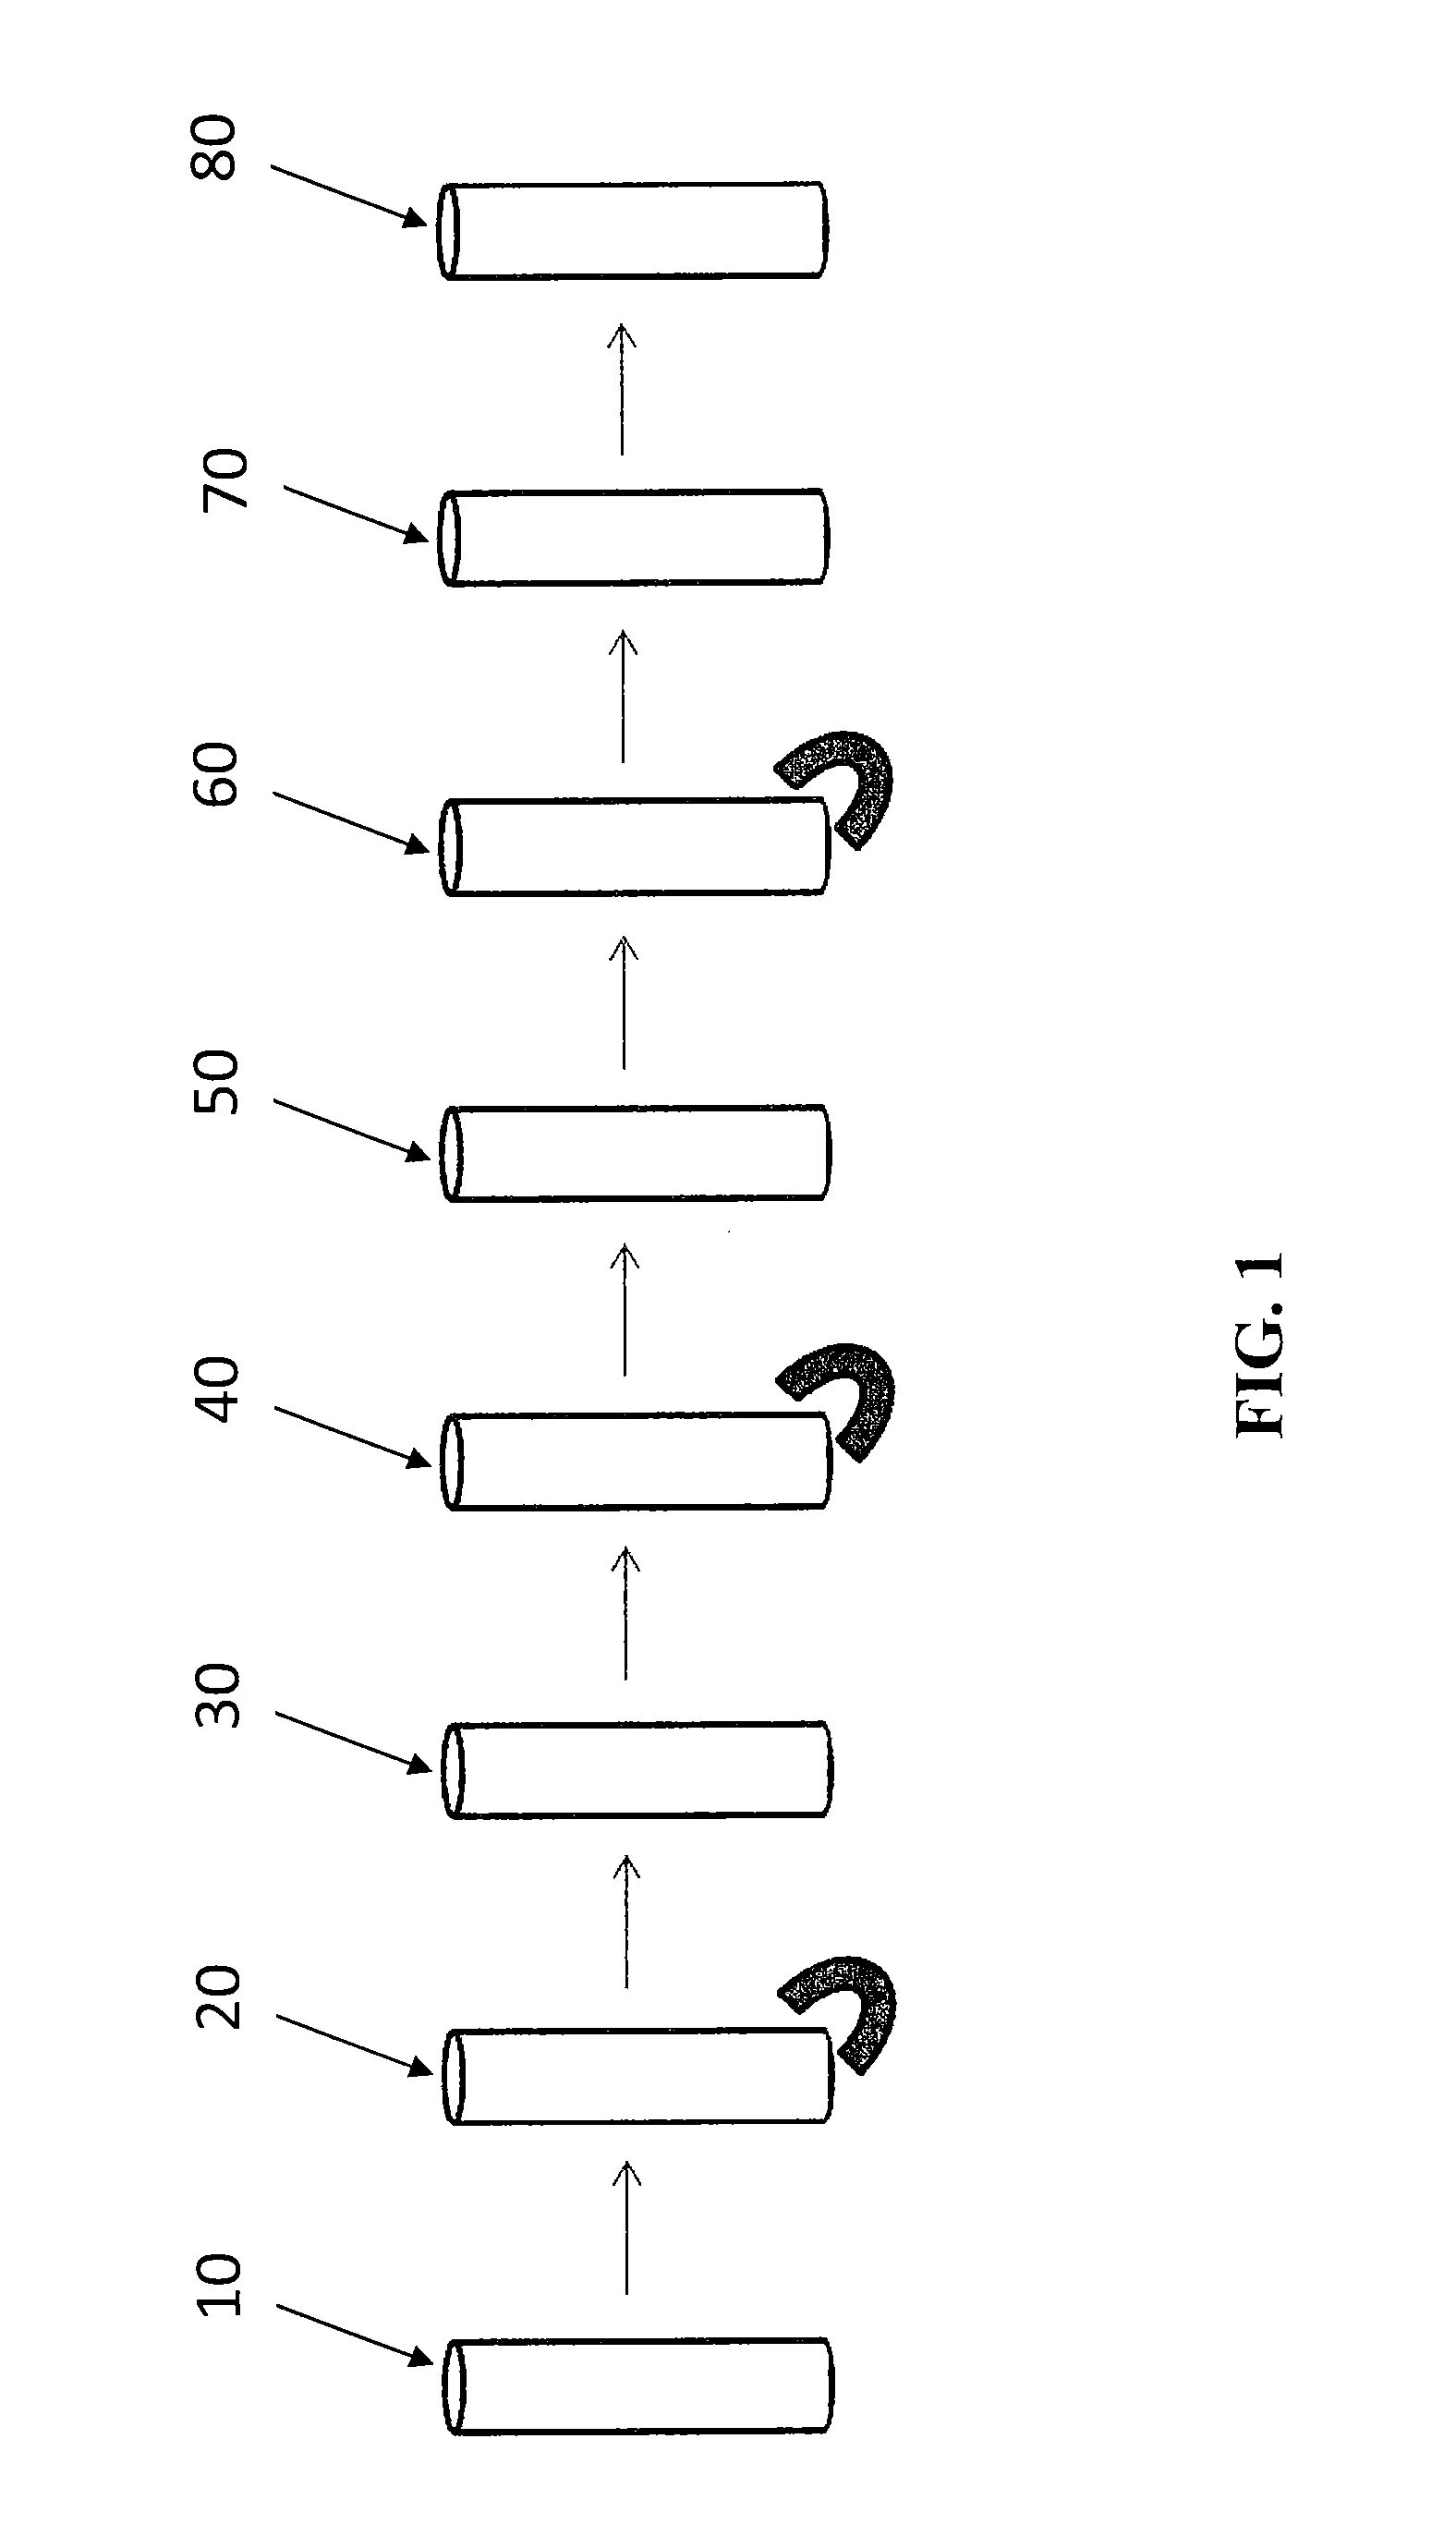 Automated immunoanalyzer system for performing diagnostic assays for allergies and autoimmune diseases